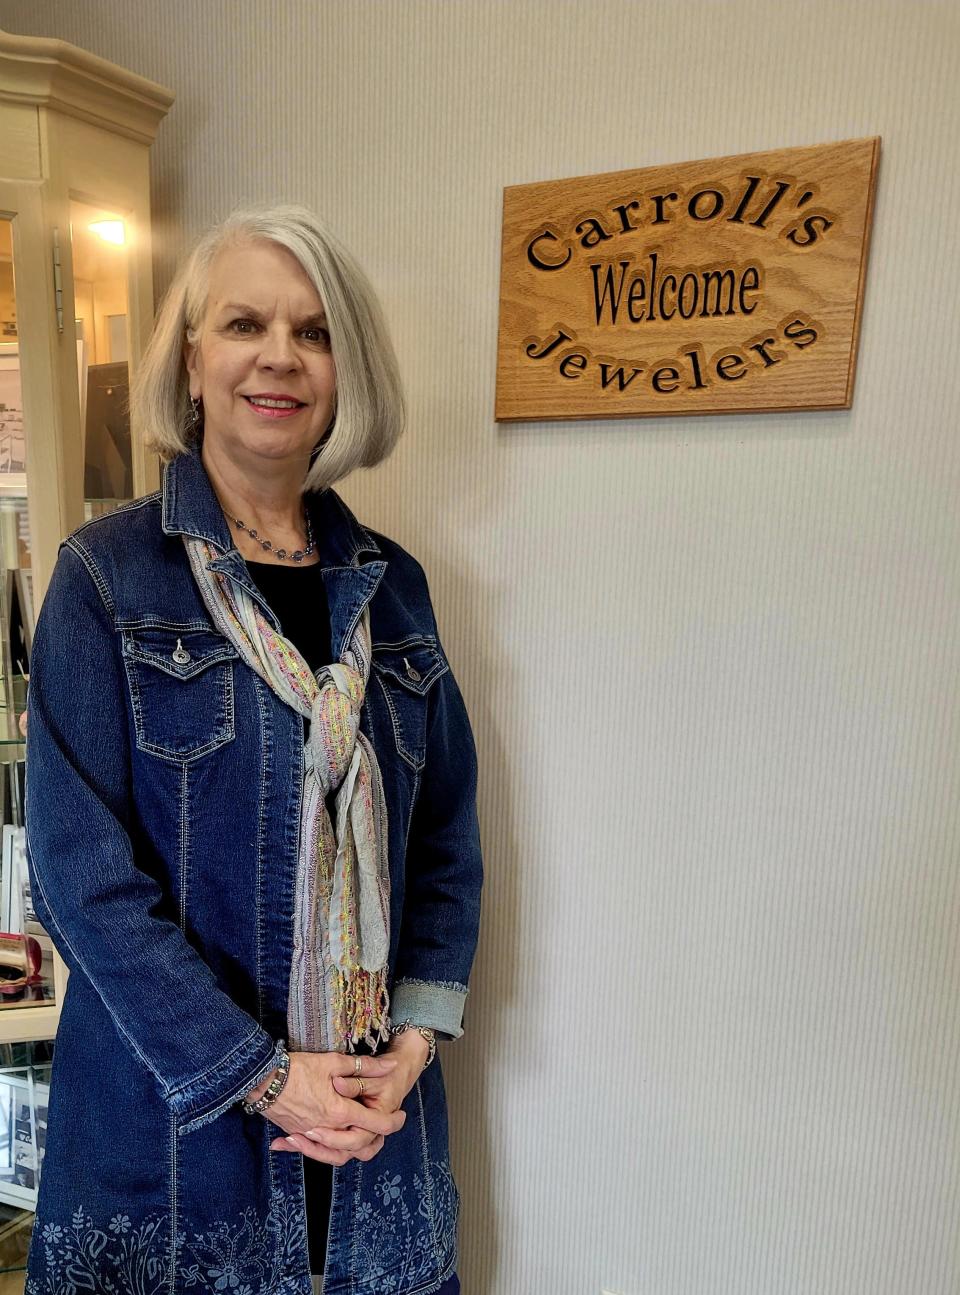 Marianne Brammell has been employed at Carroll's Jewelers in downtown Marion for more than 50 years. She's the store's manager.